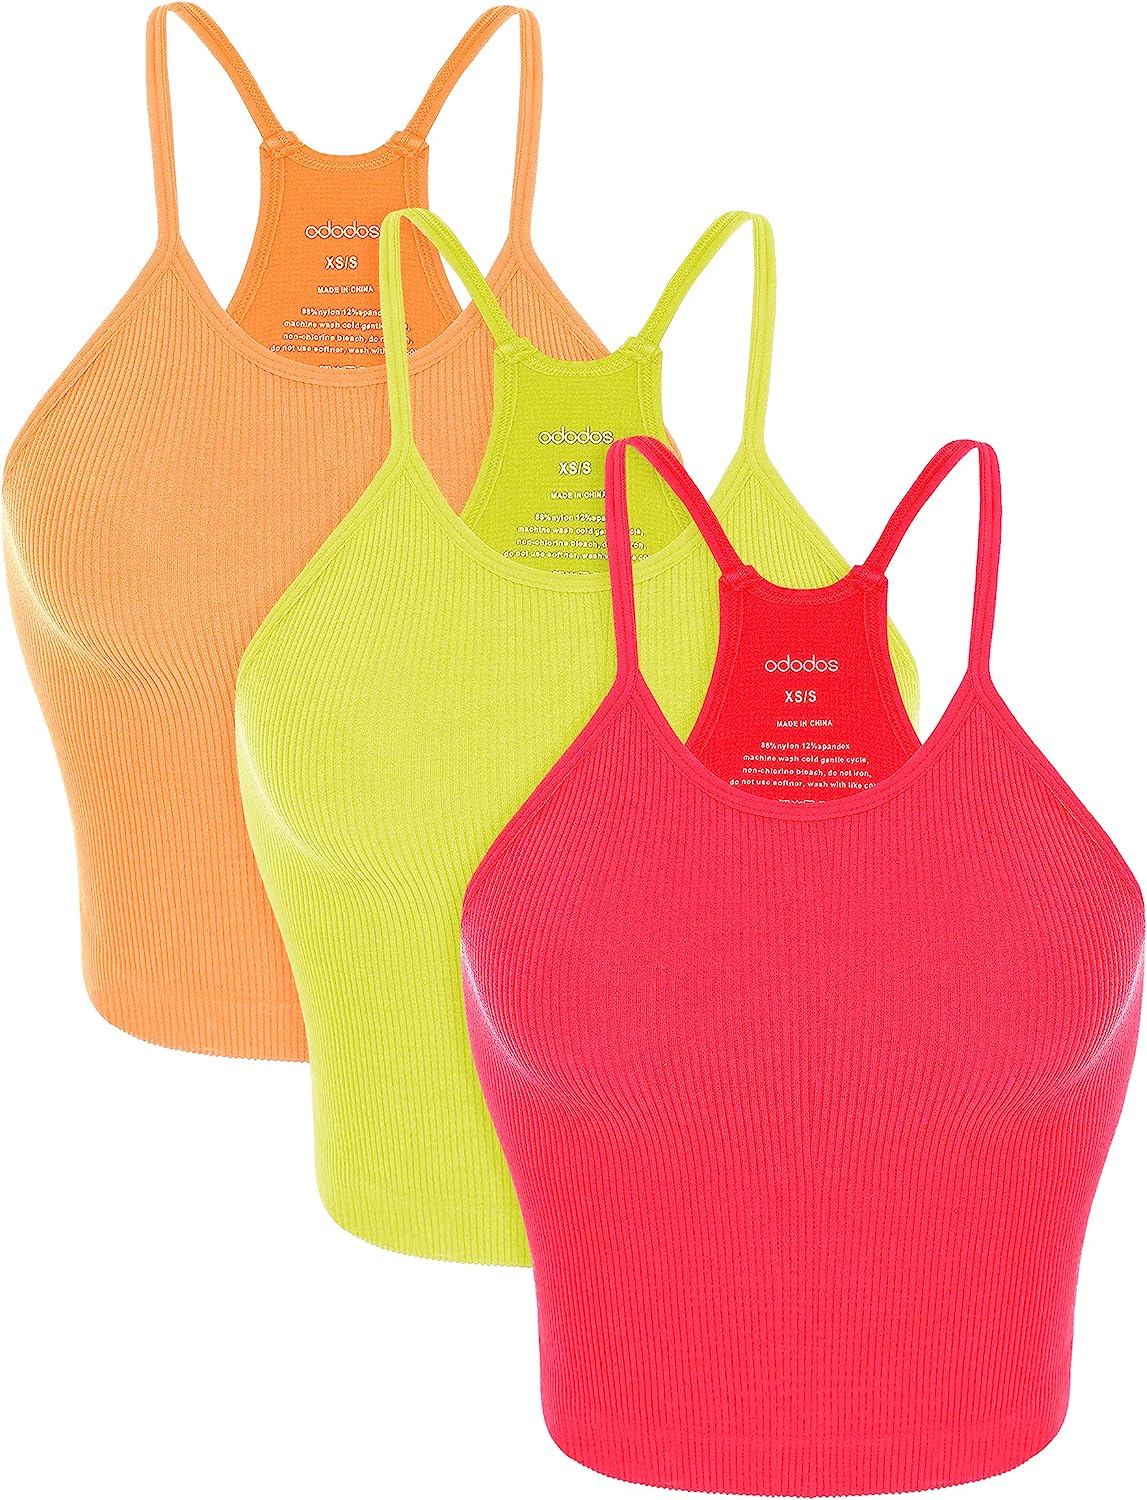 ODODOS Women's Crop 3-Pack Washed Seamless Rib-Knit Camisole Crop Tank Tops